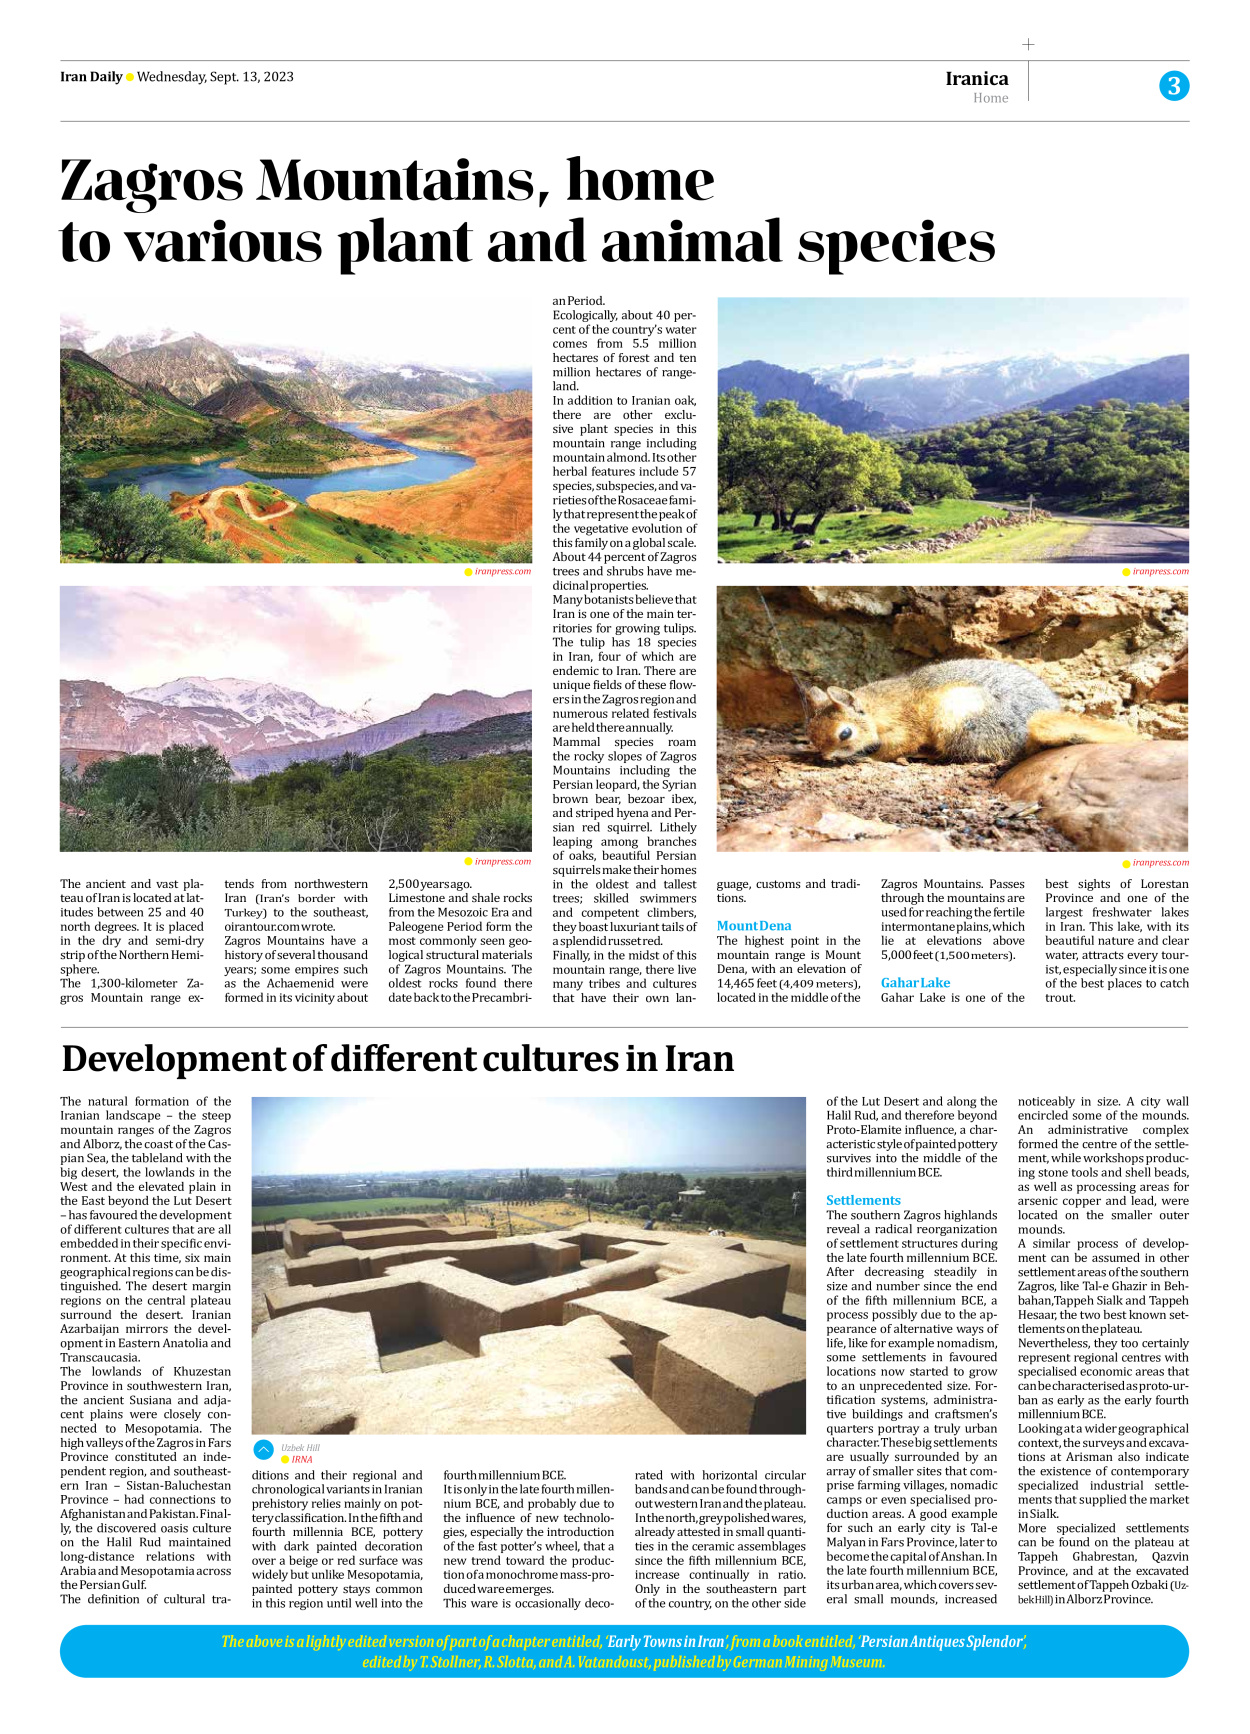 Iran Daily - Number Seven Thousand Three Hundred and Eighty Six - 13 September 2023 - Page 3